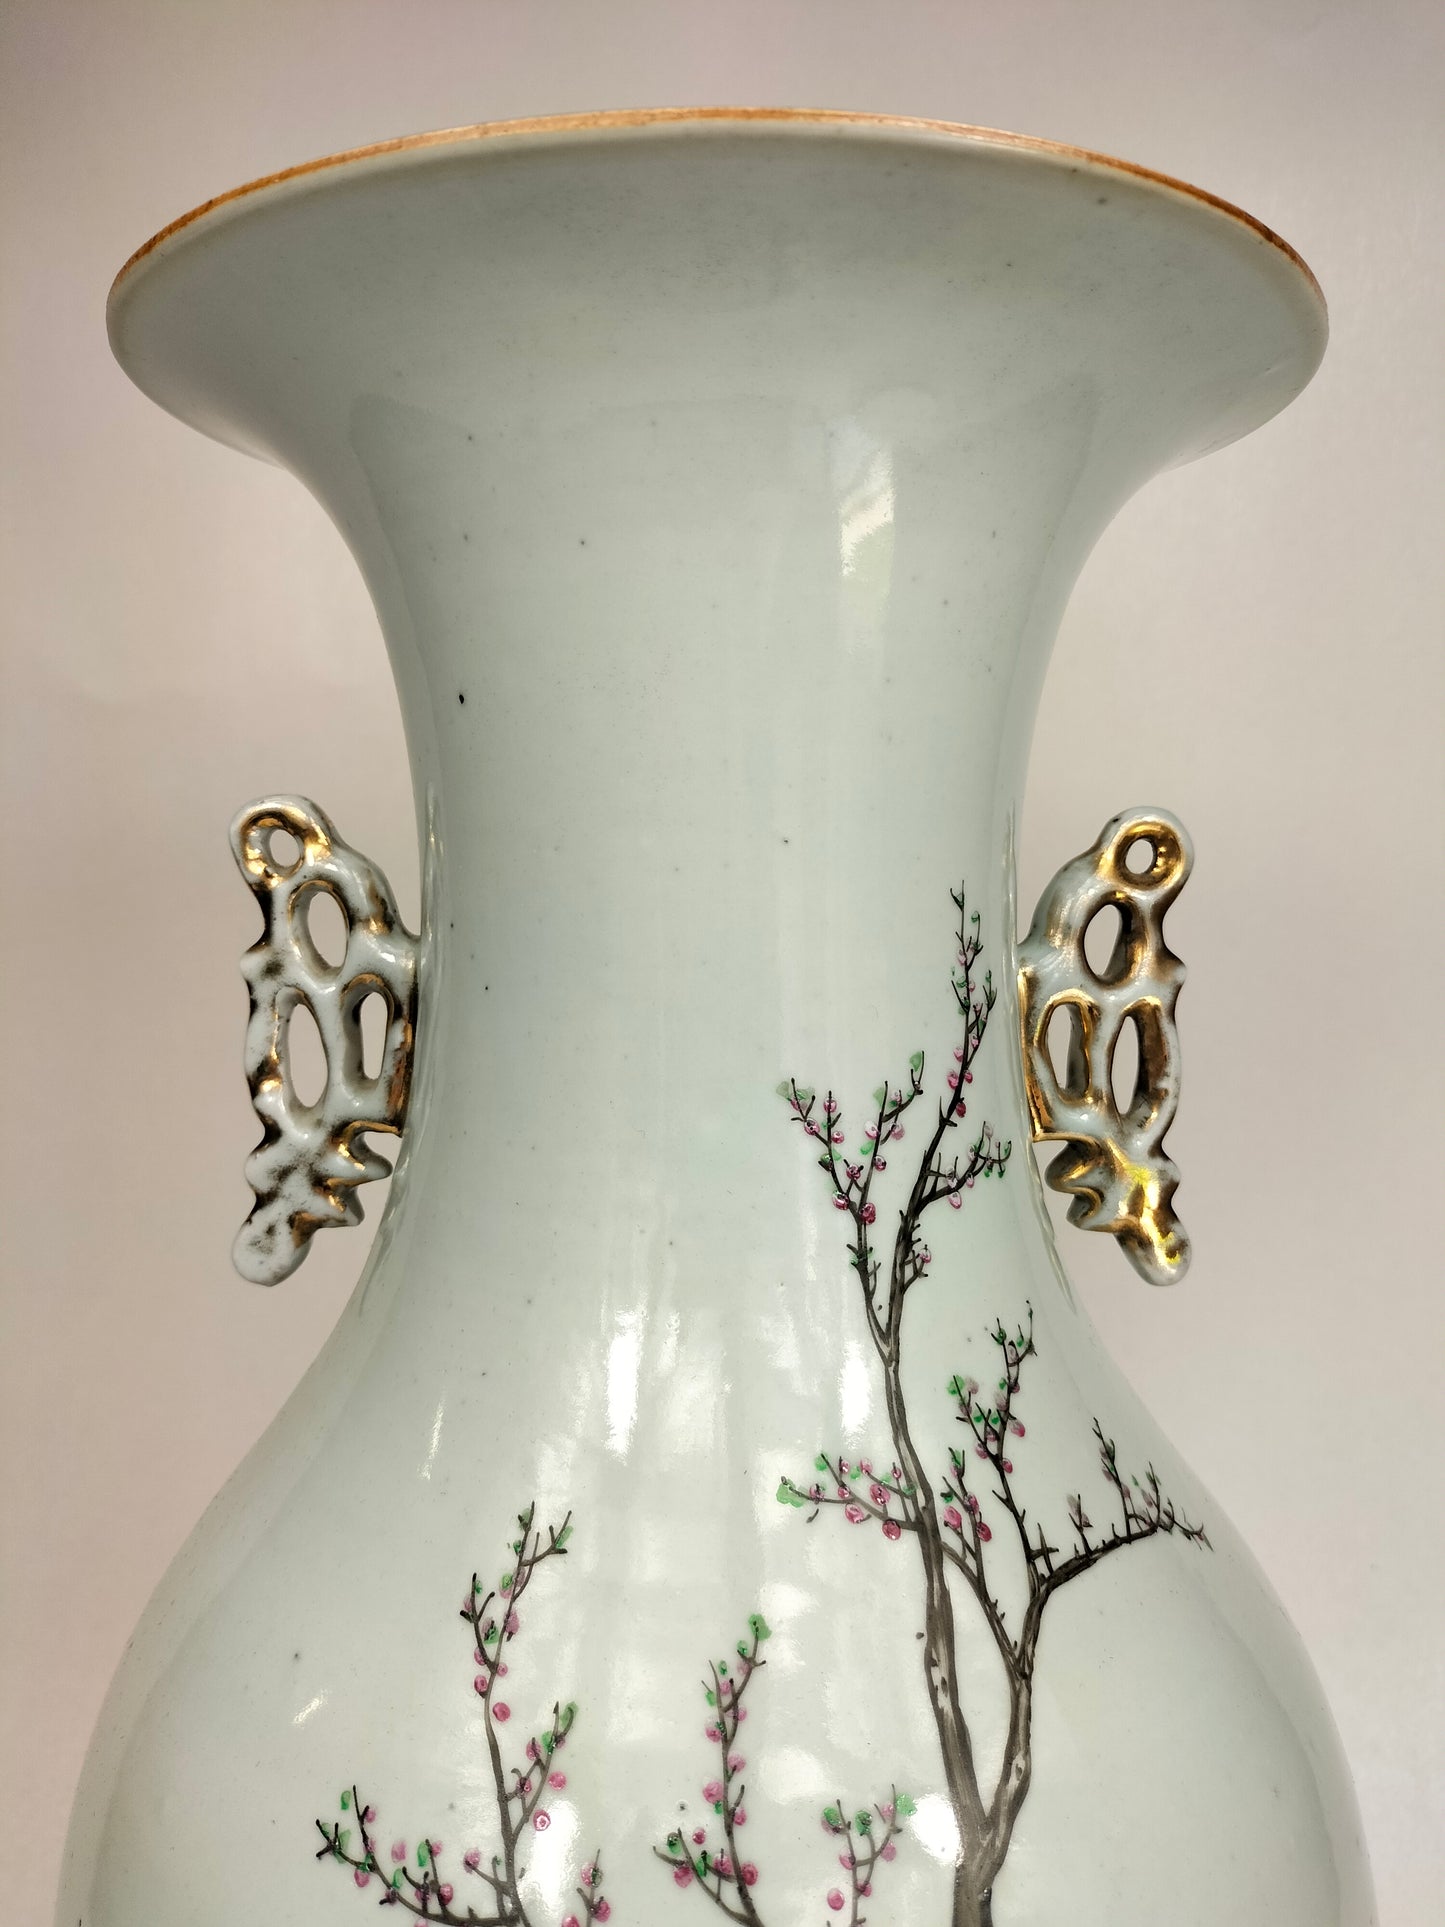 Large antique Chinese qianjiang vase decorated with a garden scene // Republic Period (1912-1949)